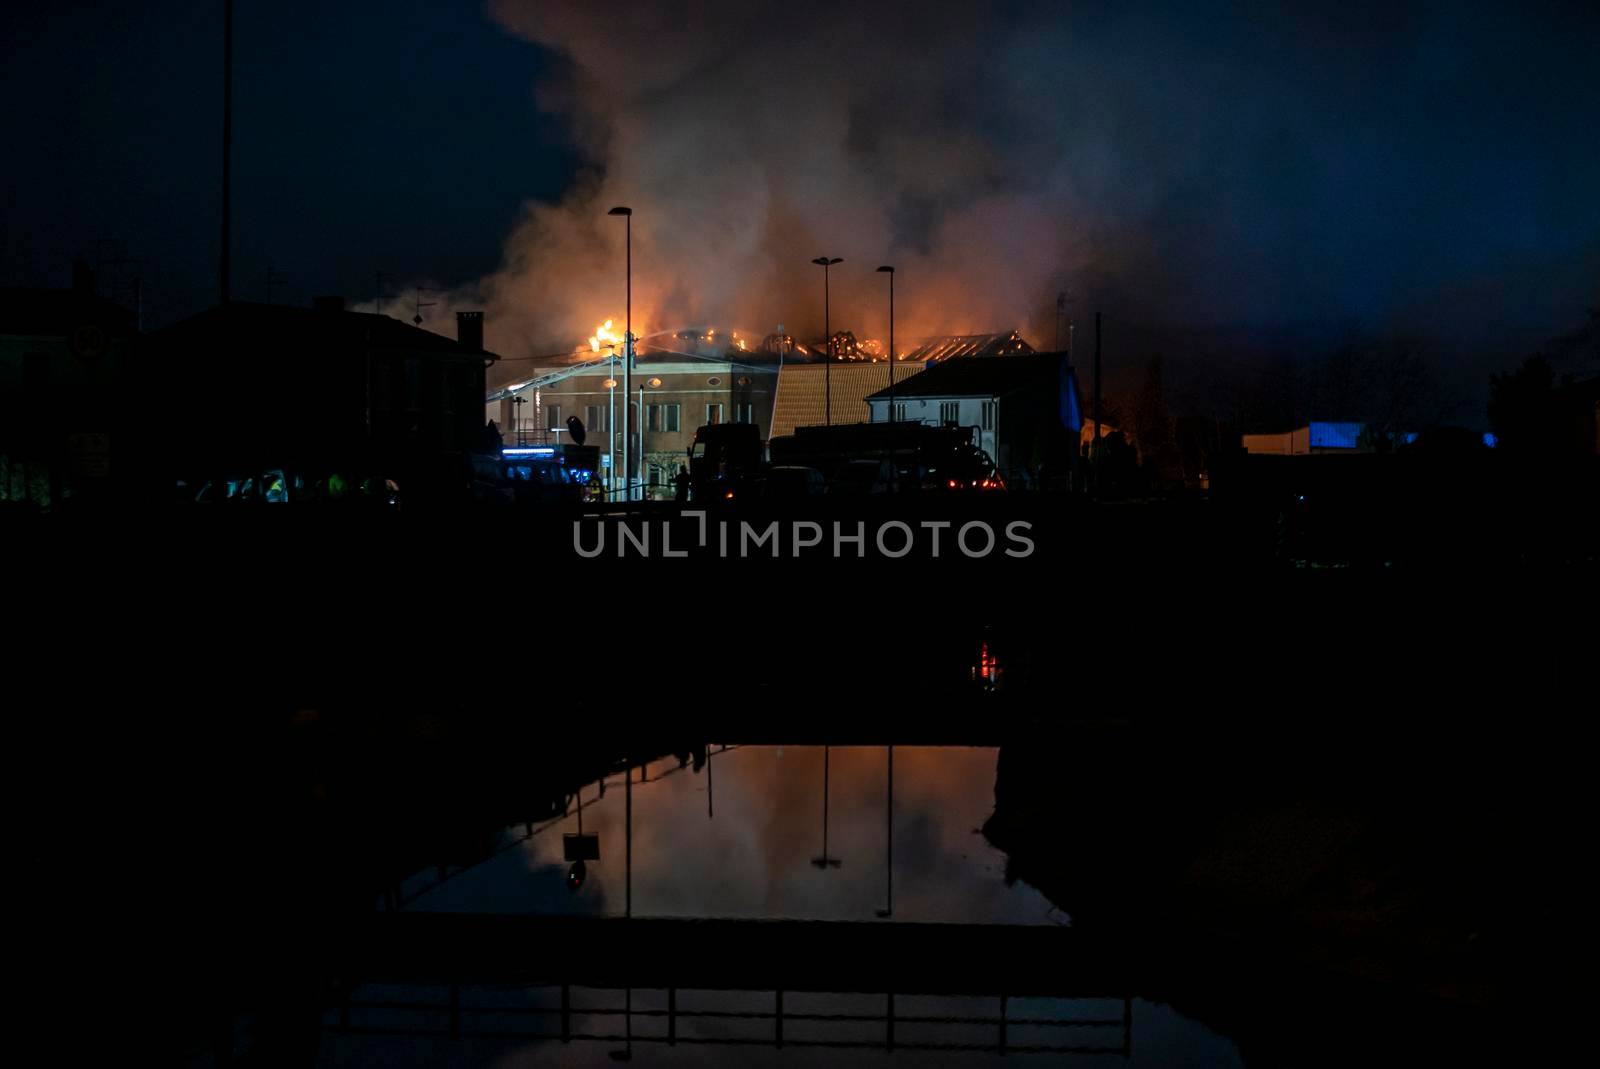 House burning at night with firefighters 7 by pippocarlot